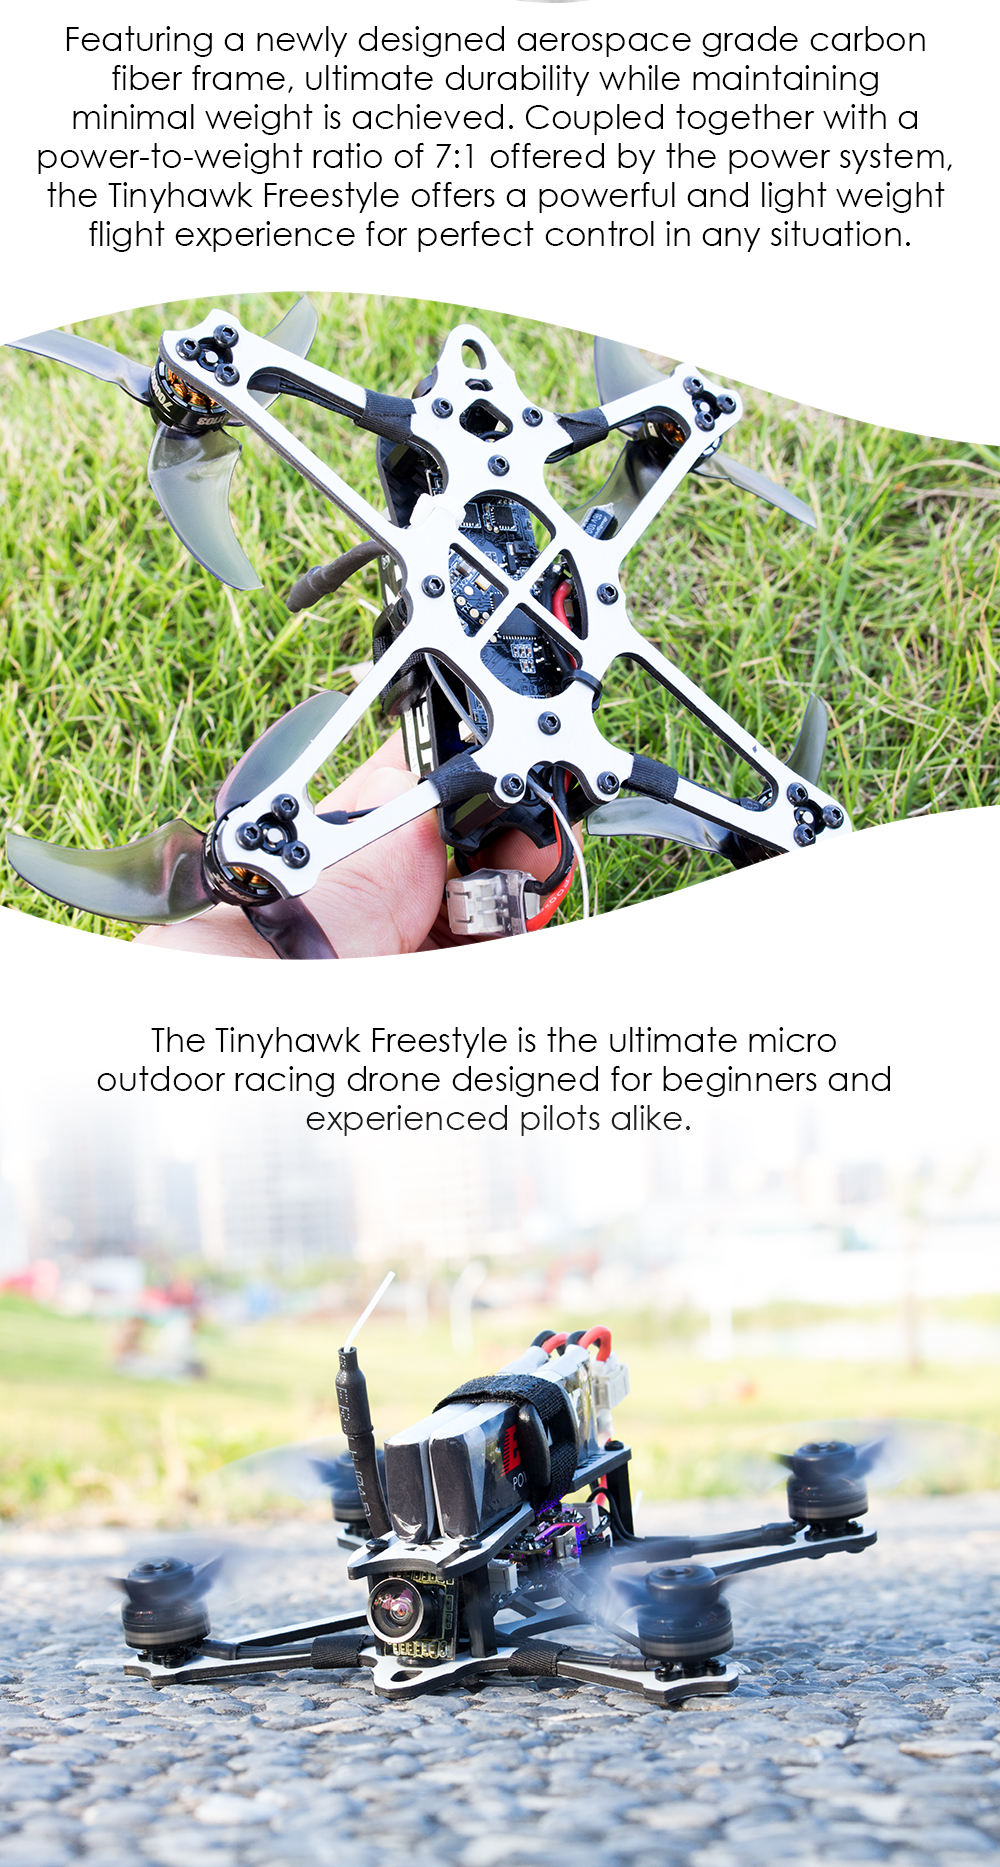 EMAX-Tinyhawk-Freestyle-115mm-25inch-F4-5A-ESC-FPV-Racing-RC-Drone-BNF-Version-1544254-3